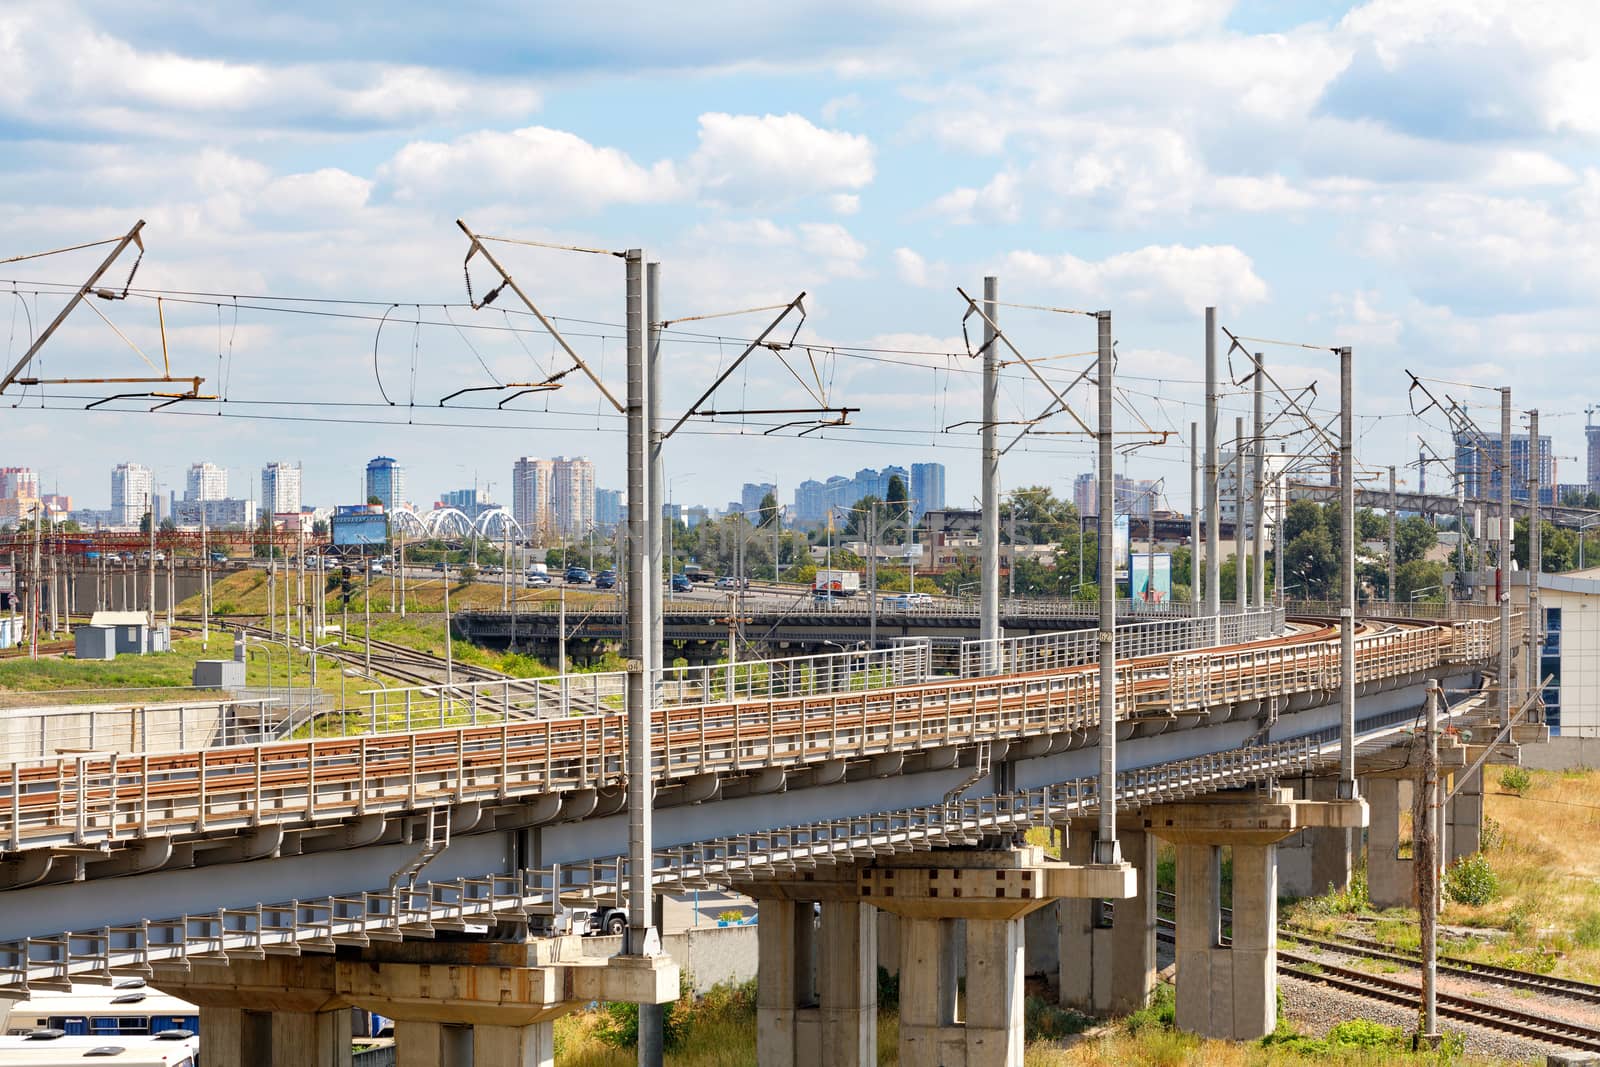 Perspective of a multi-channel and multi-level railway for electric trains with overhead power lines on a summer day against the backdrop of a blurred cityscape in the haze.